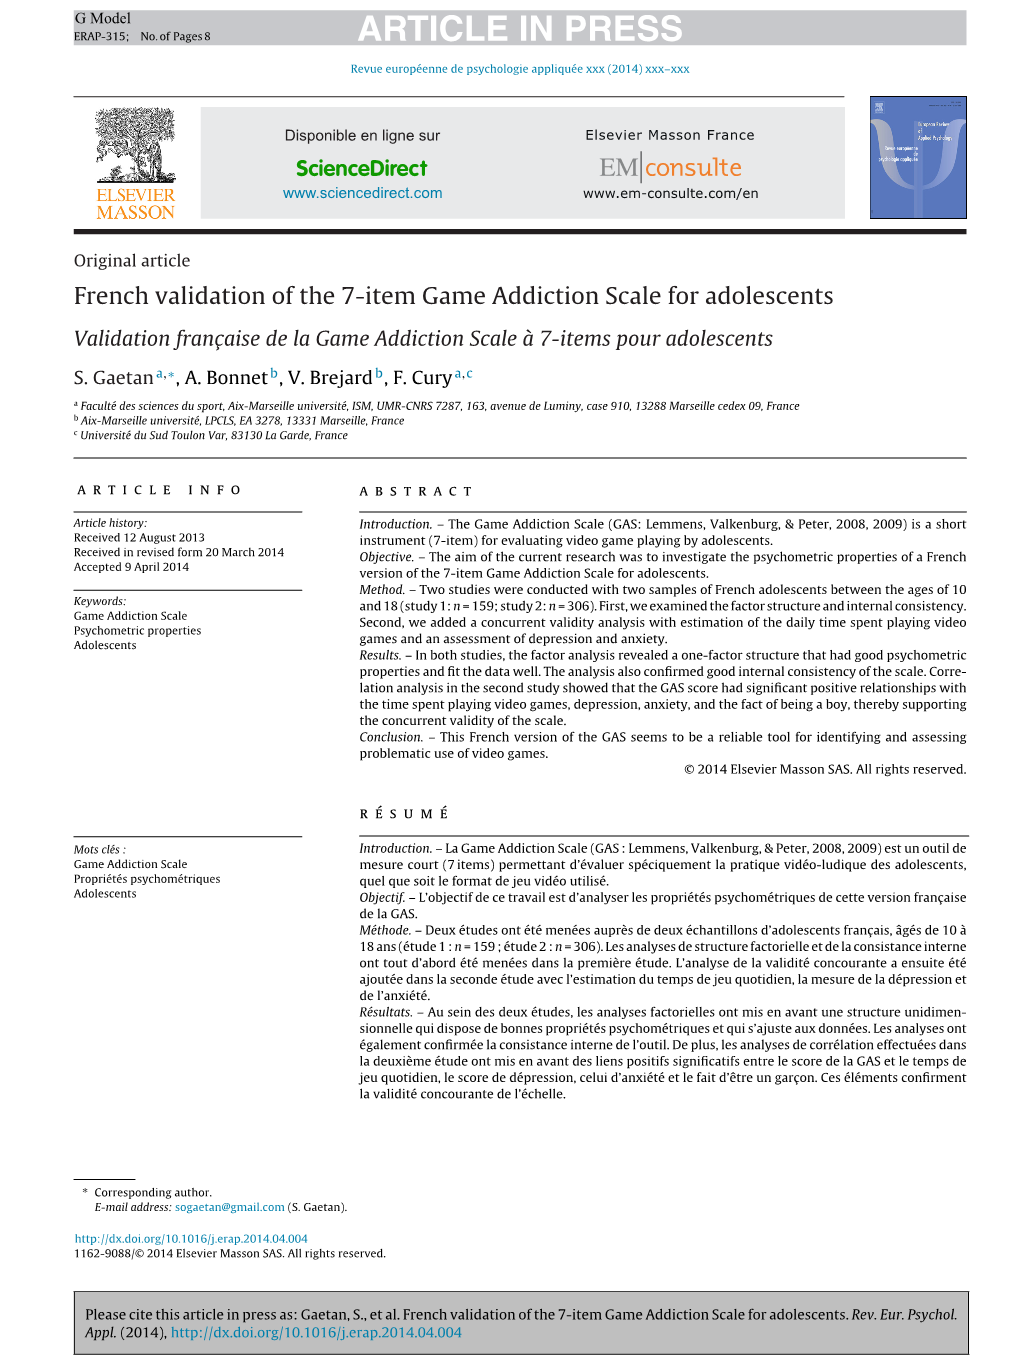 French Validation of the 7-Item Game Addiction Scale for Adolescents